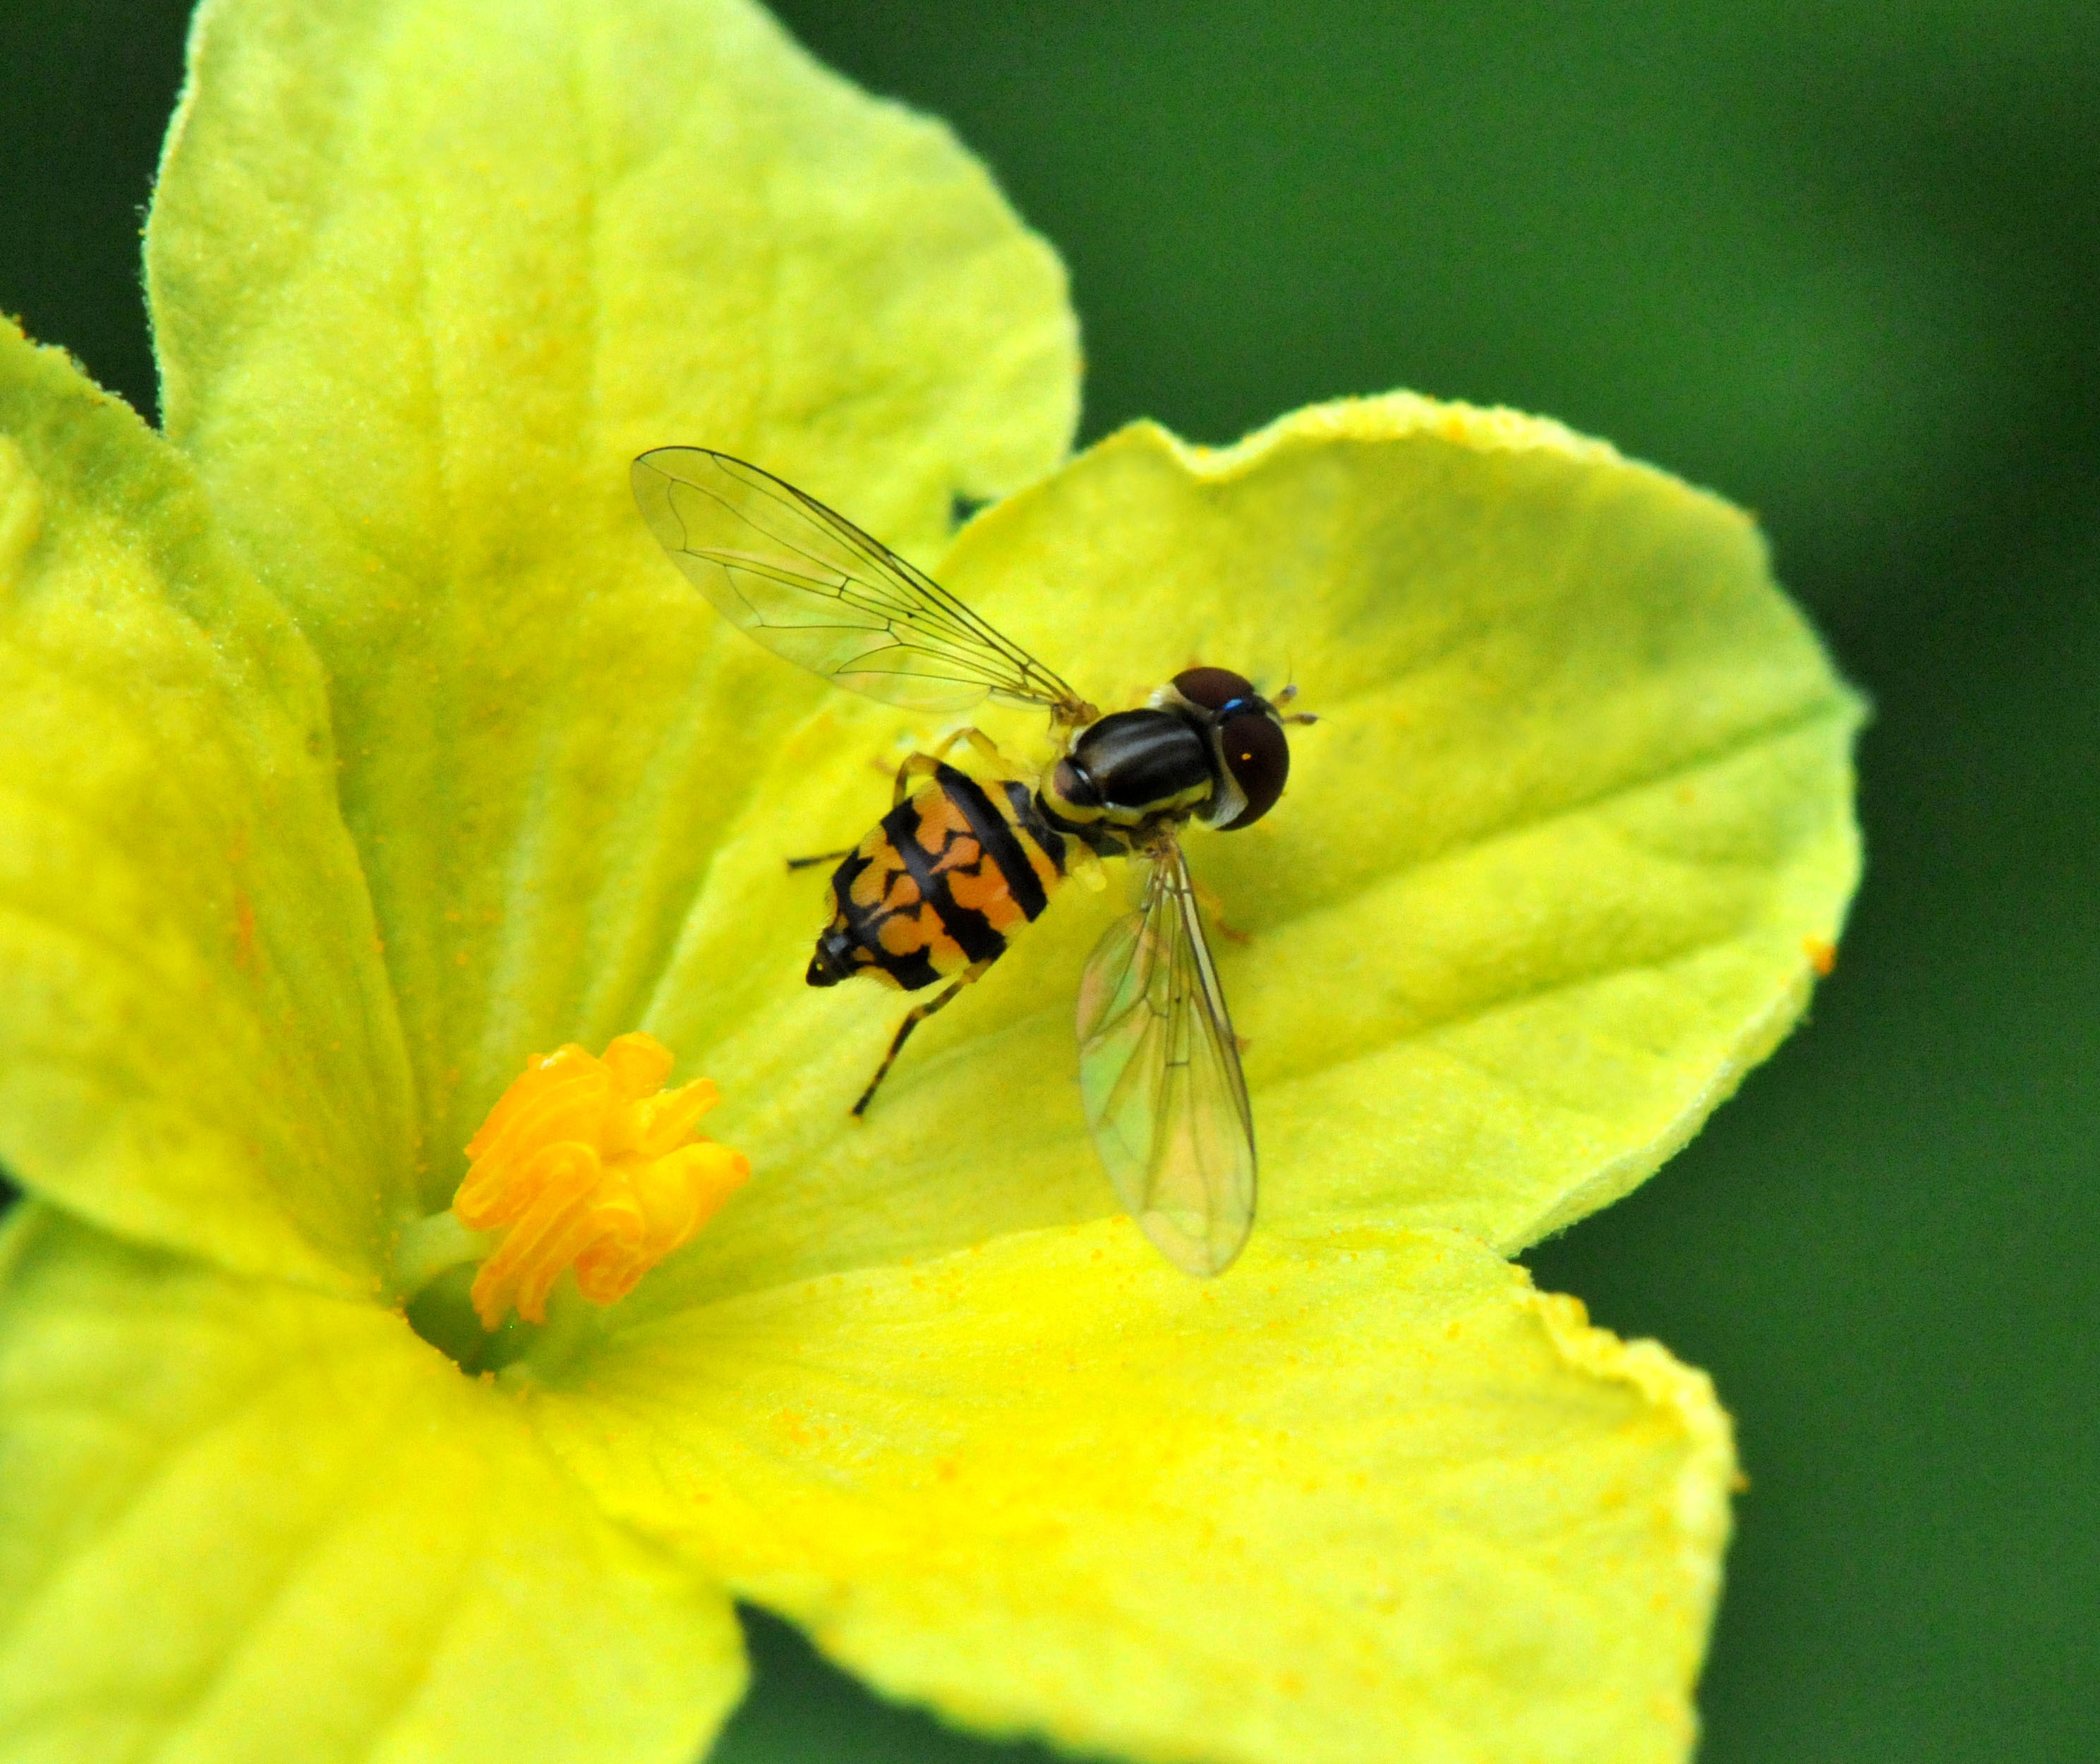 Hover fly on Bitter Melon Flower – Petals and Wings